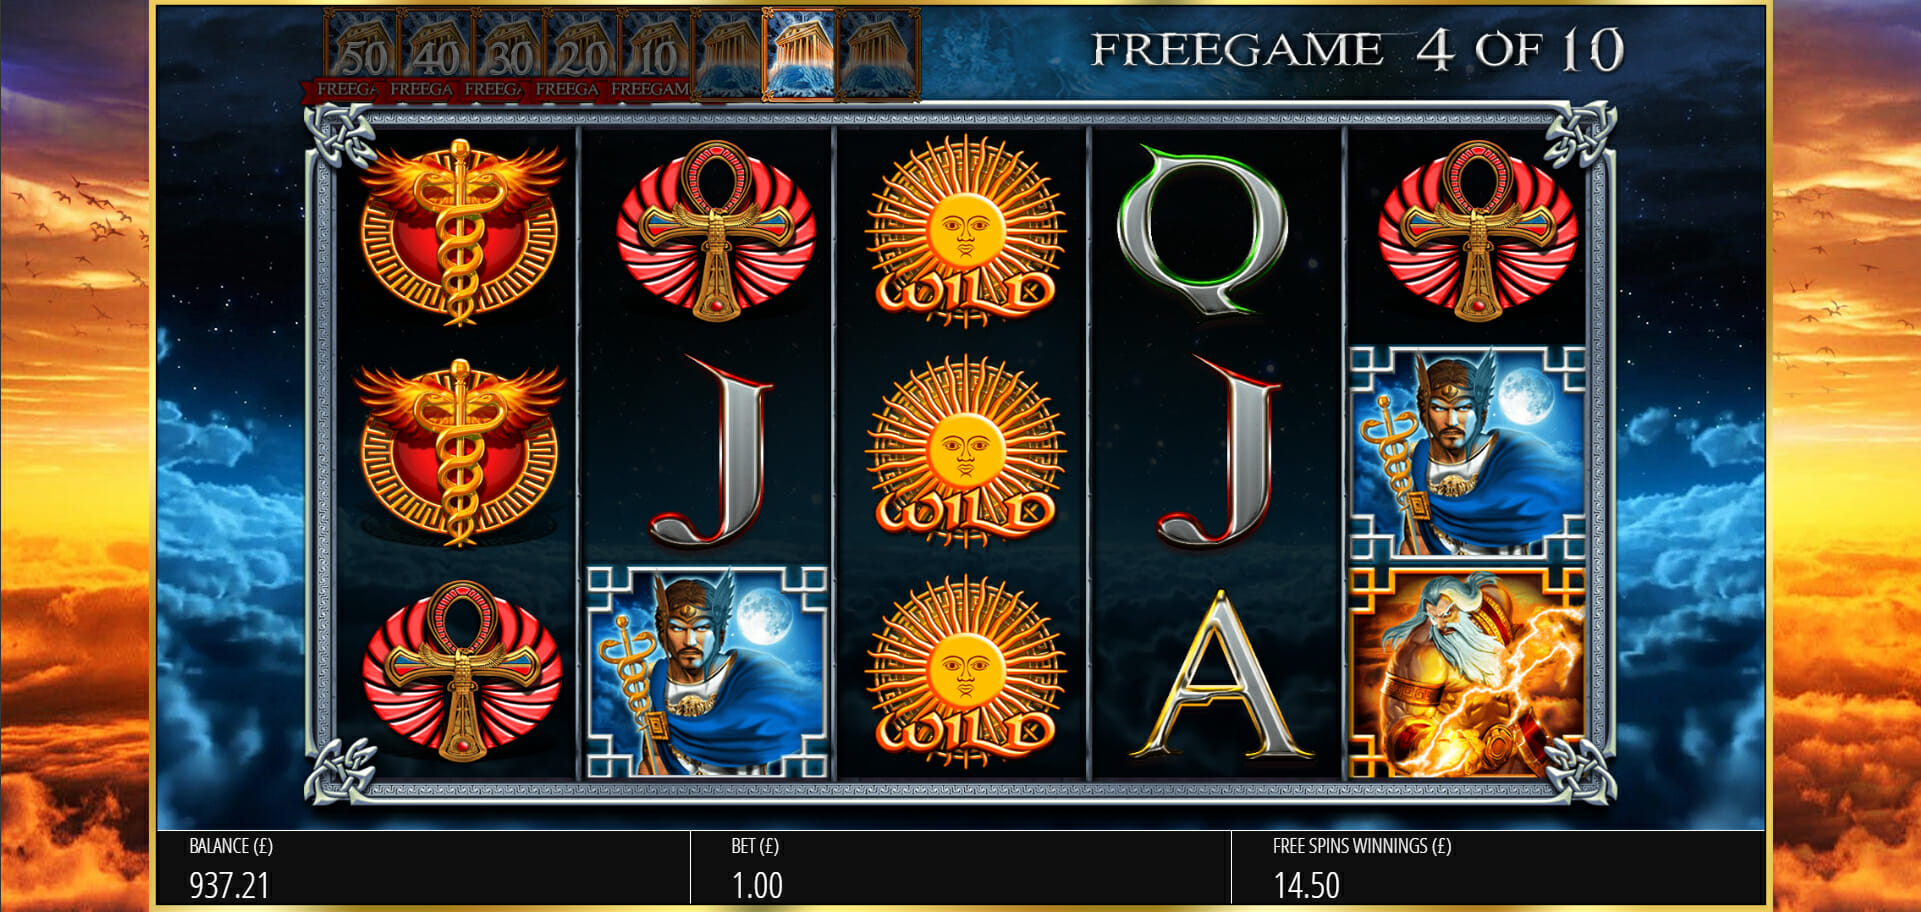 Journey of the Gods online slot, exclusively at Casumo